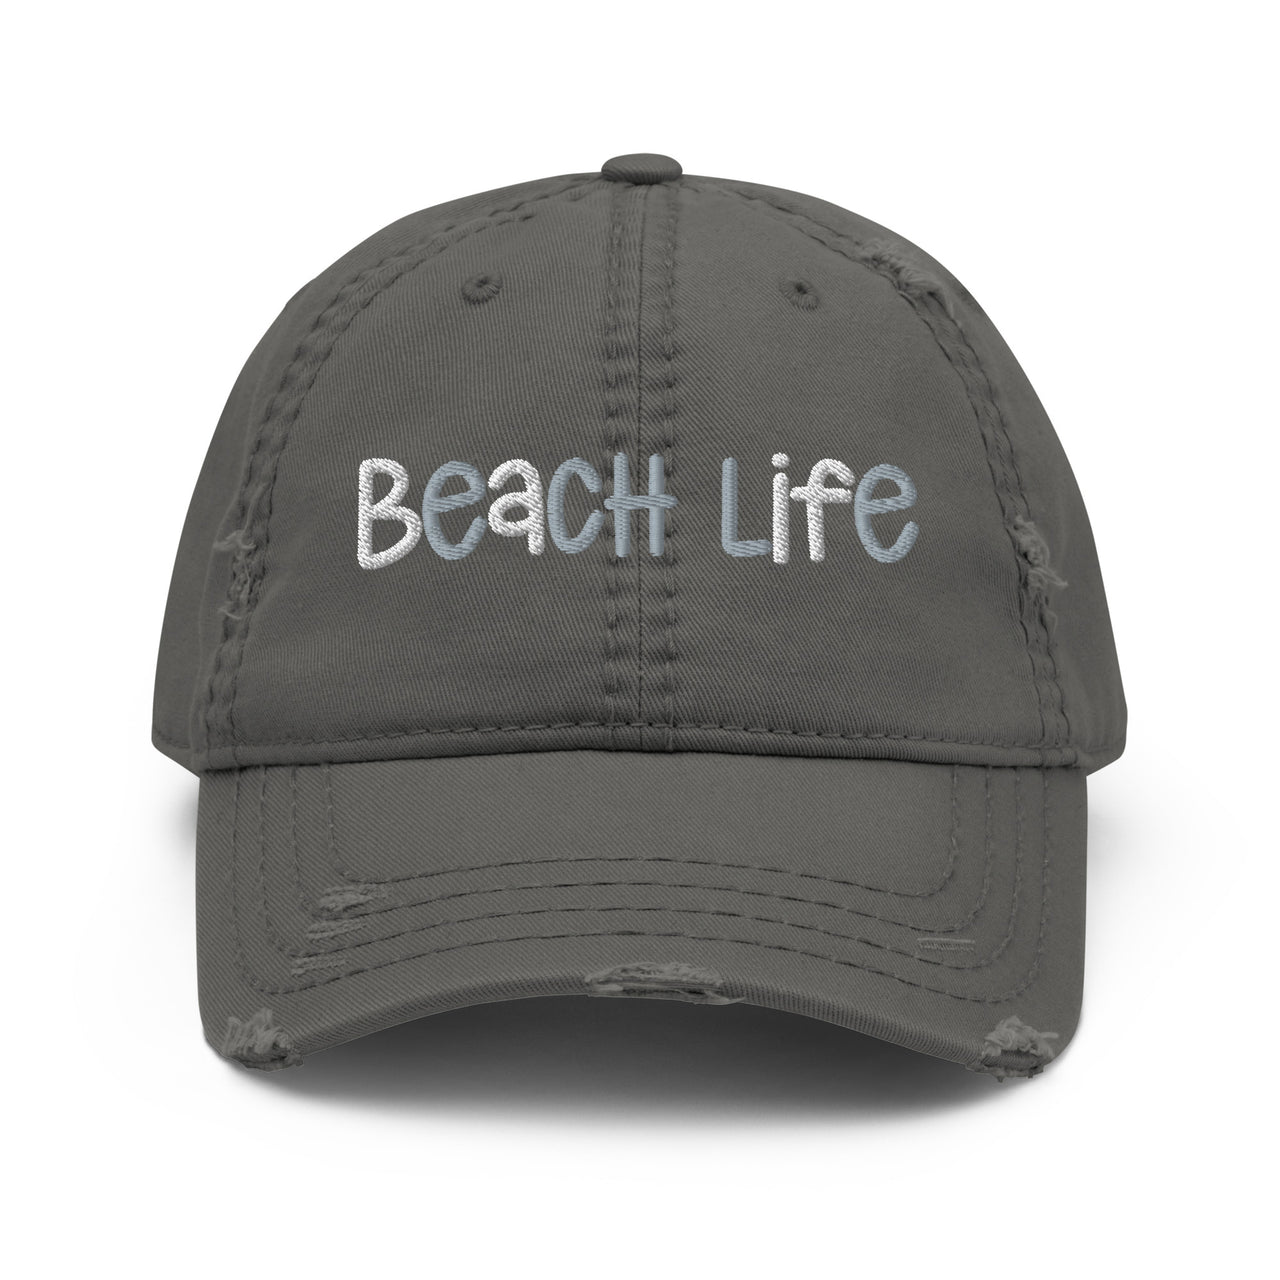 Beach Life Distressed Cap  New England Trading Co Charcoal Grey  